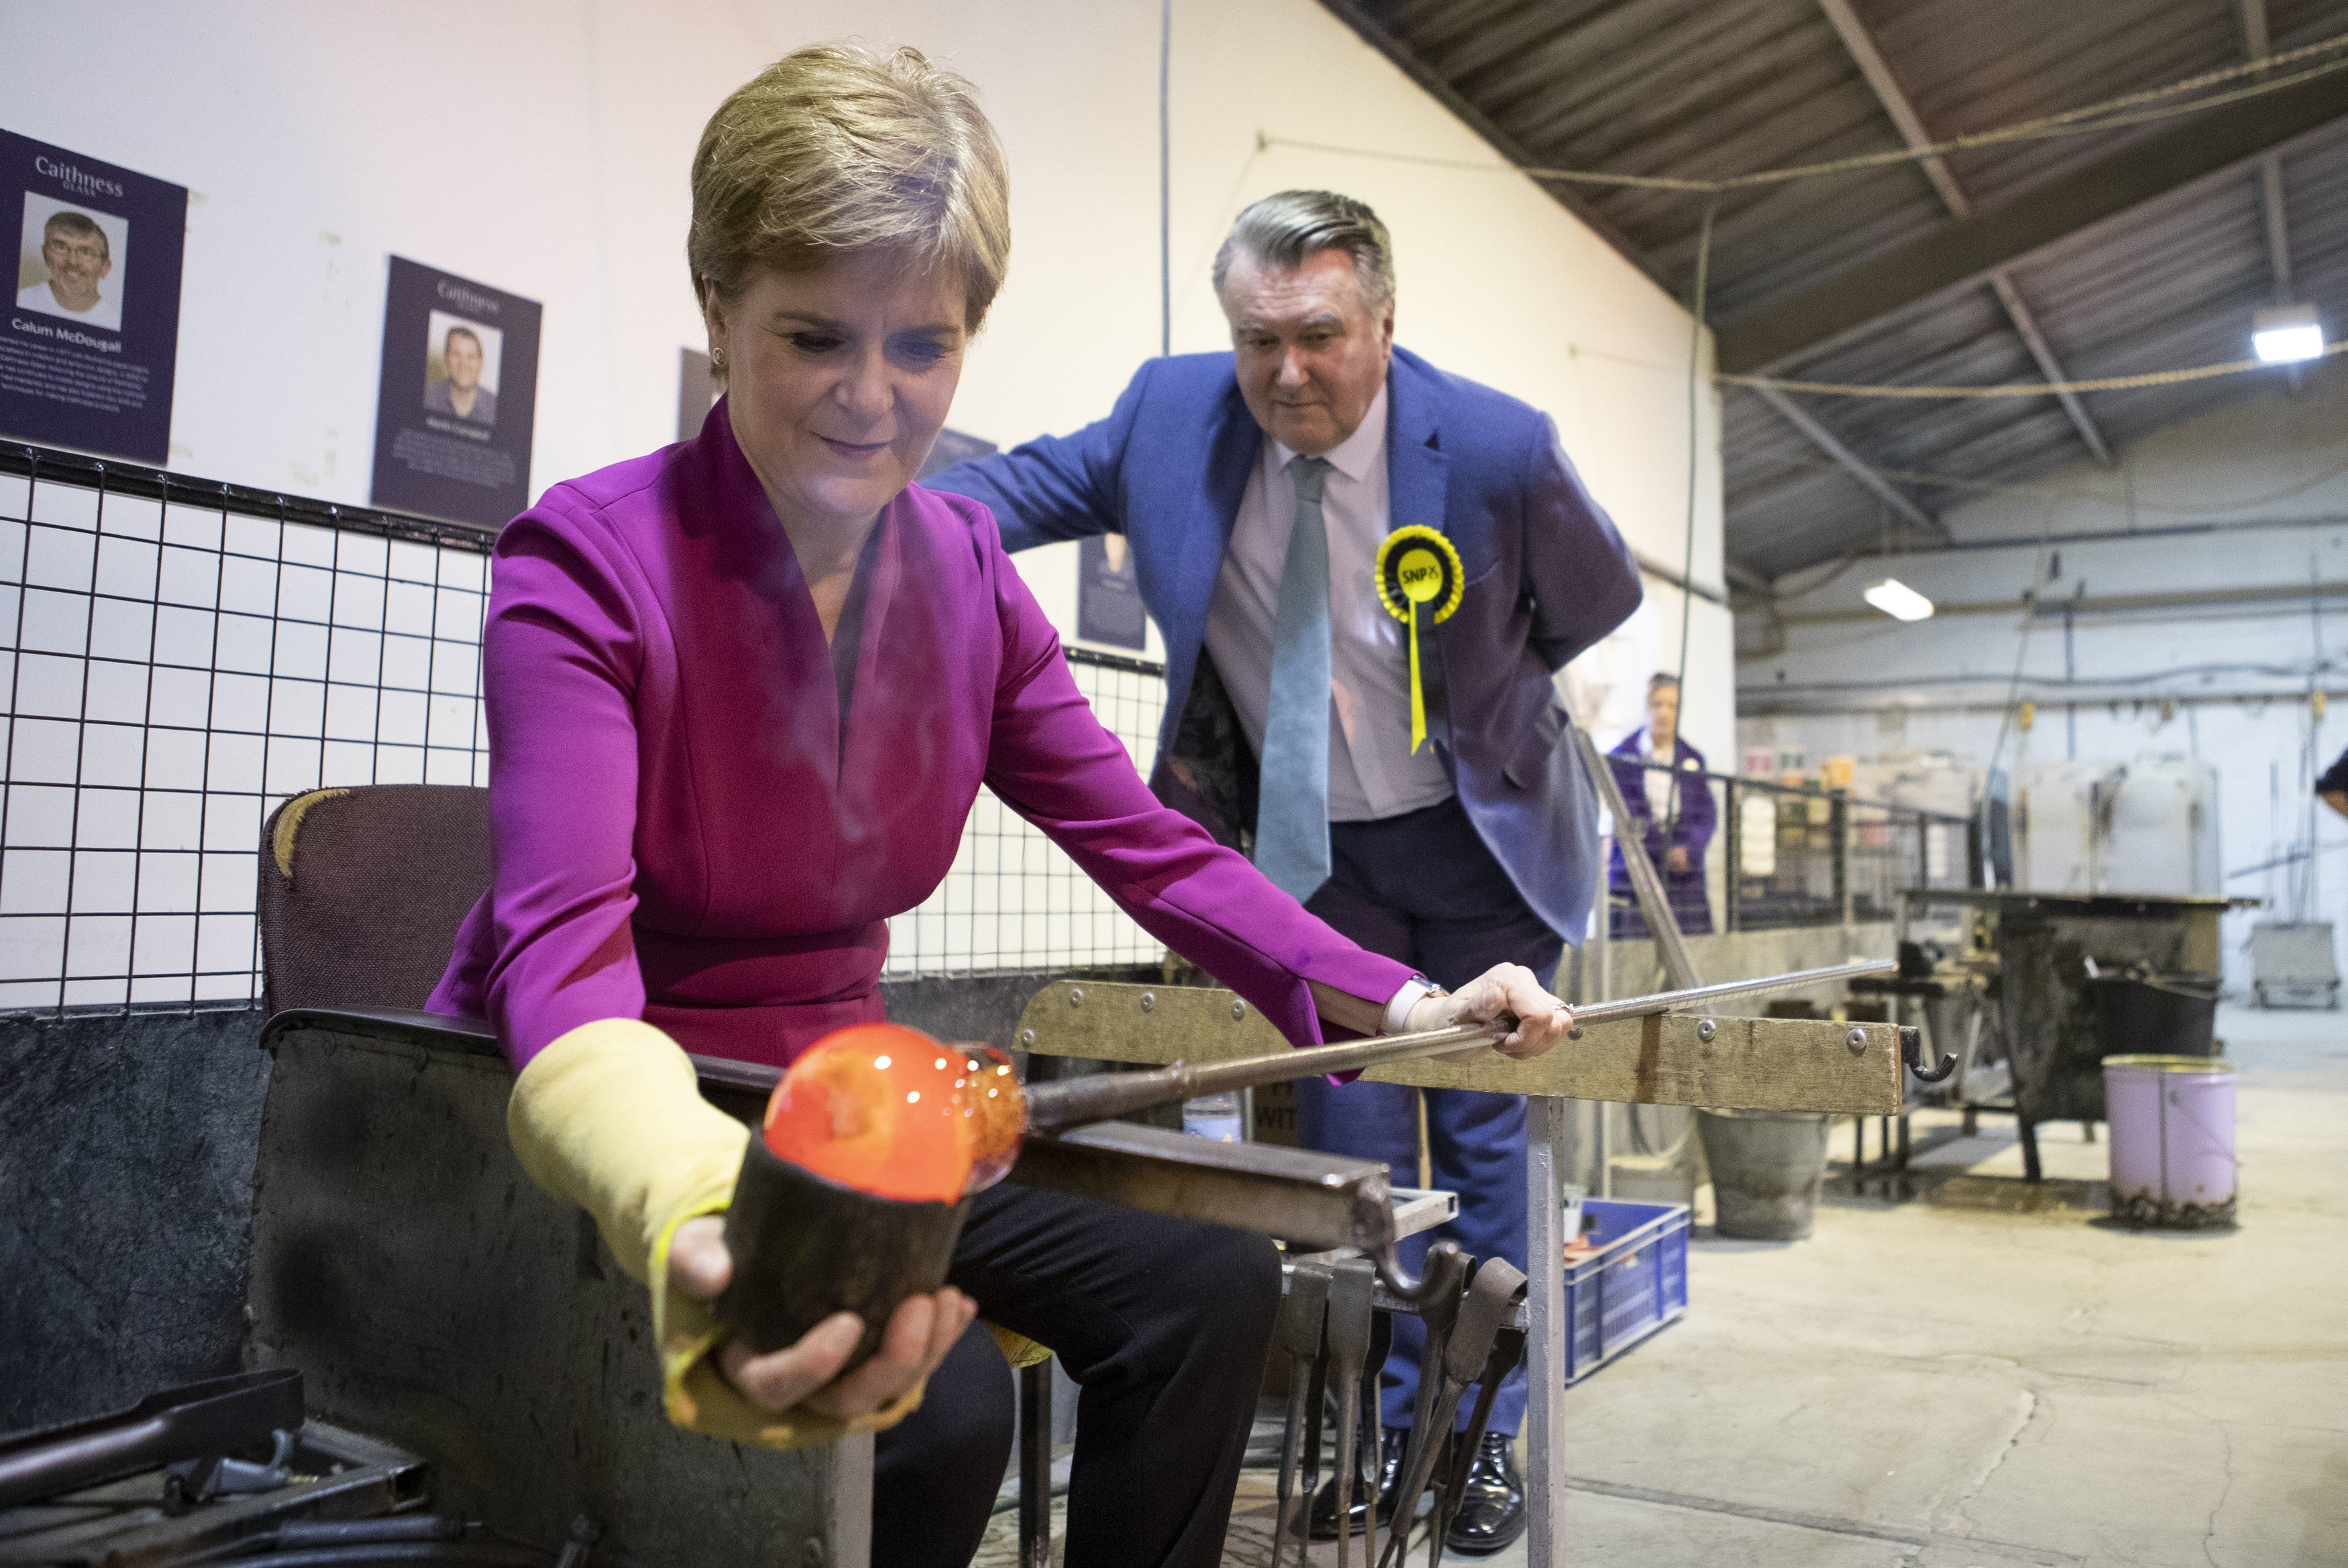 SNP leader Nicola Sturgeon, with SNP candidate for Ochil & South Perthshire, John Nicolson, makes a glass paperweight at Caithness Glass during a visit to Crieff Visitors Centre